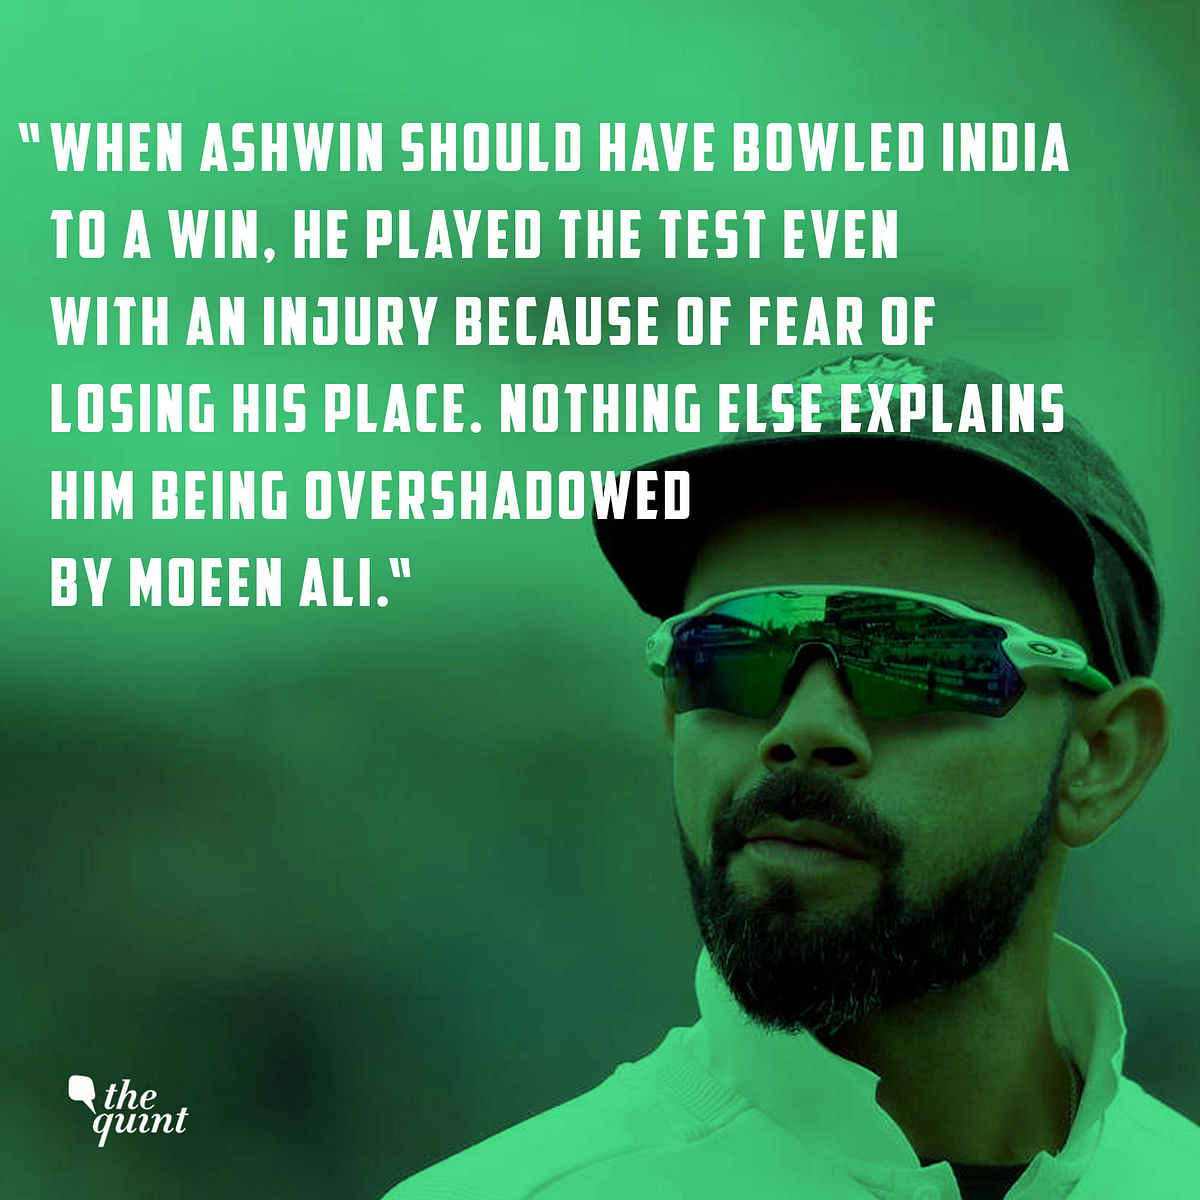 Without results overseas, should India make changes and replace Virat Kohli as the captain?